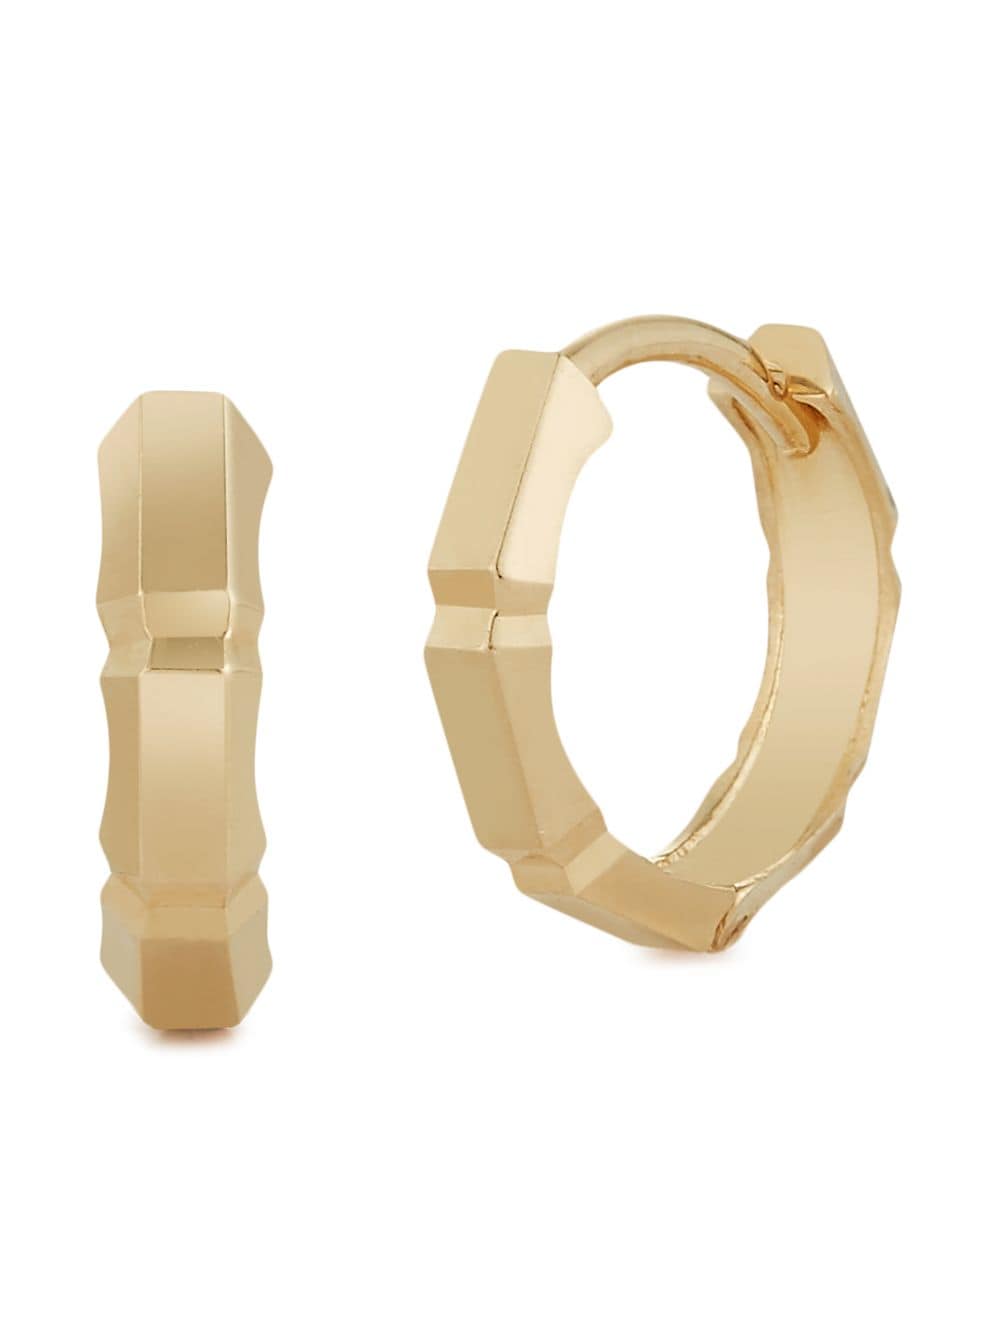 Shop Mateo 14kt Yellow Gold Faceted Huggie Earrings